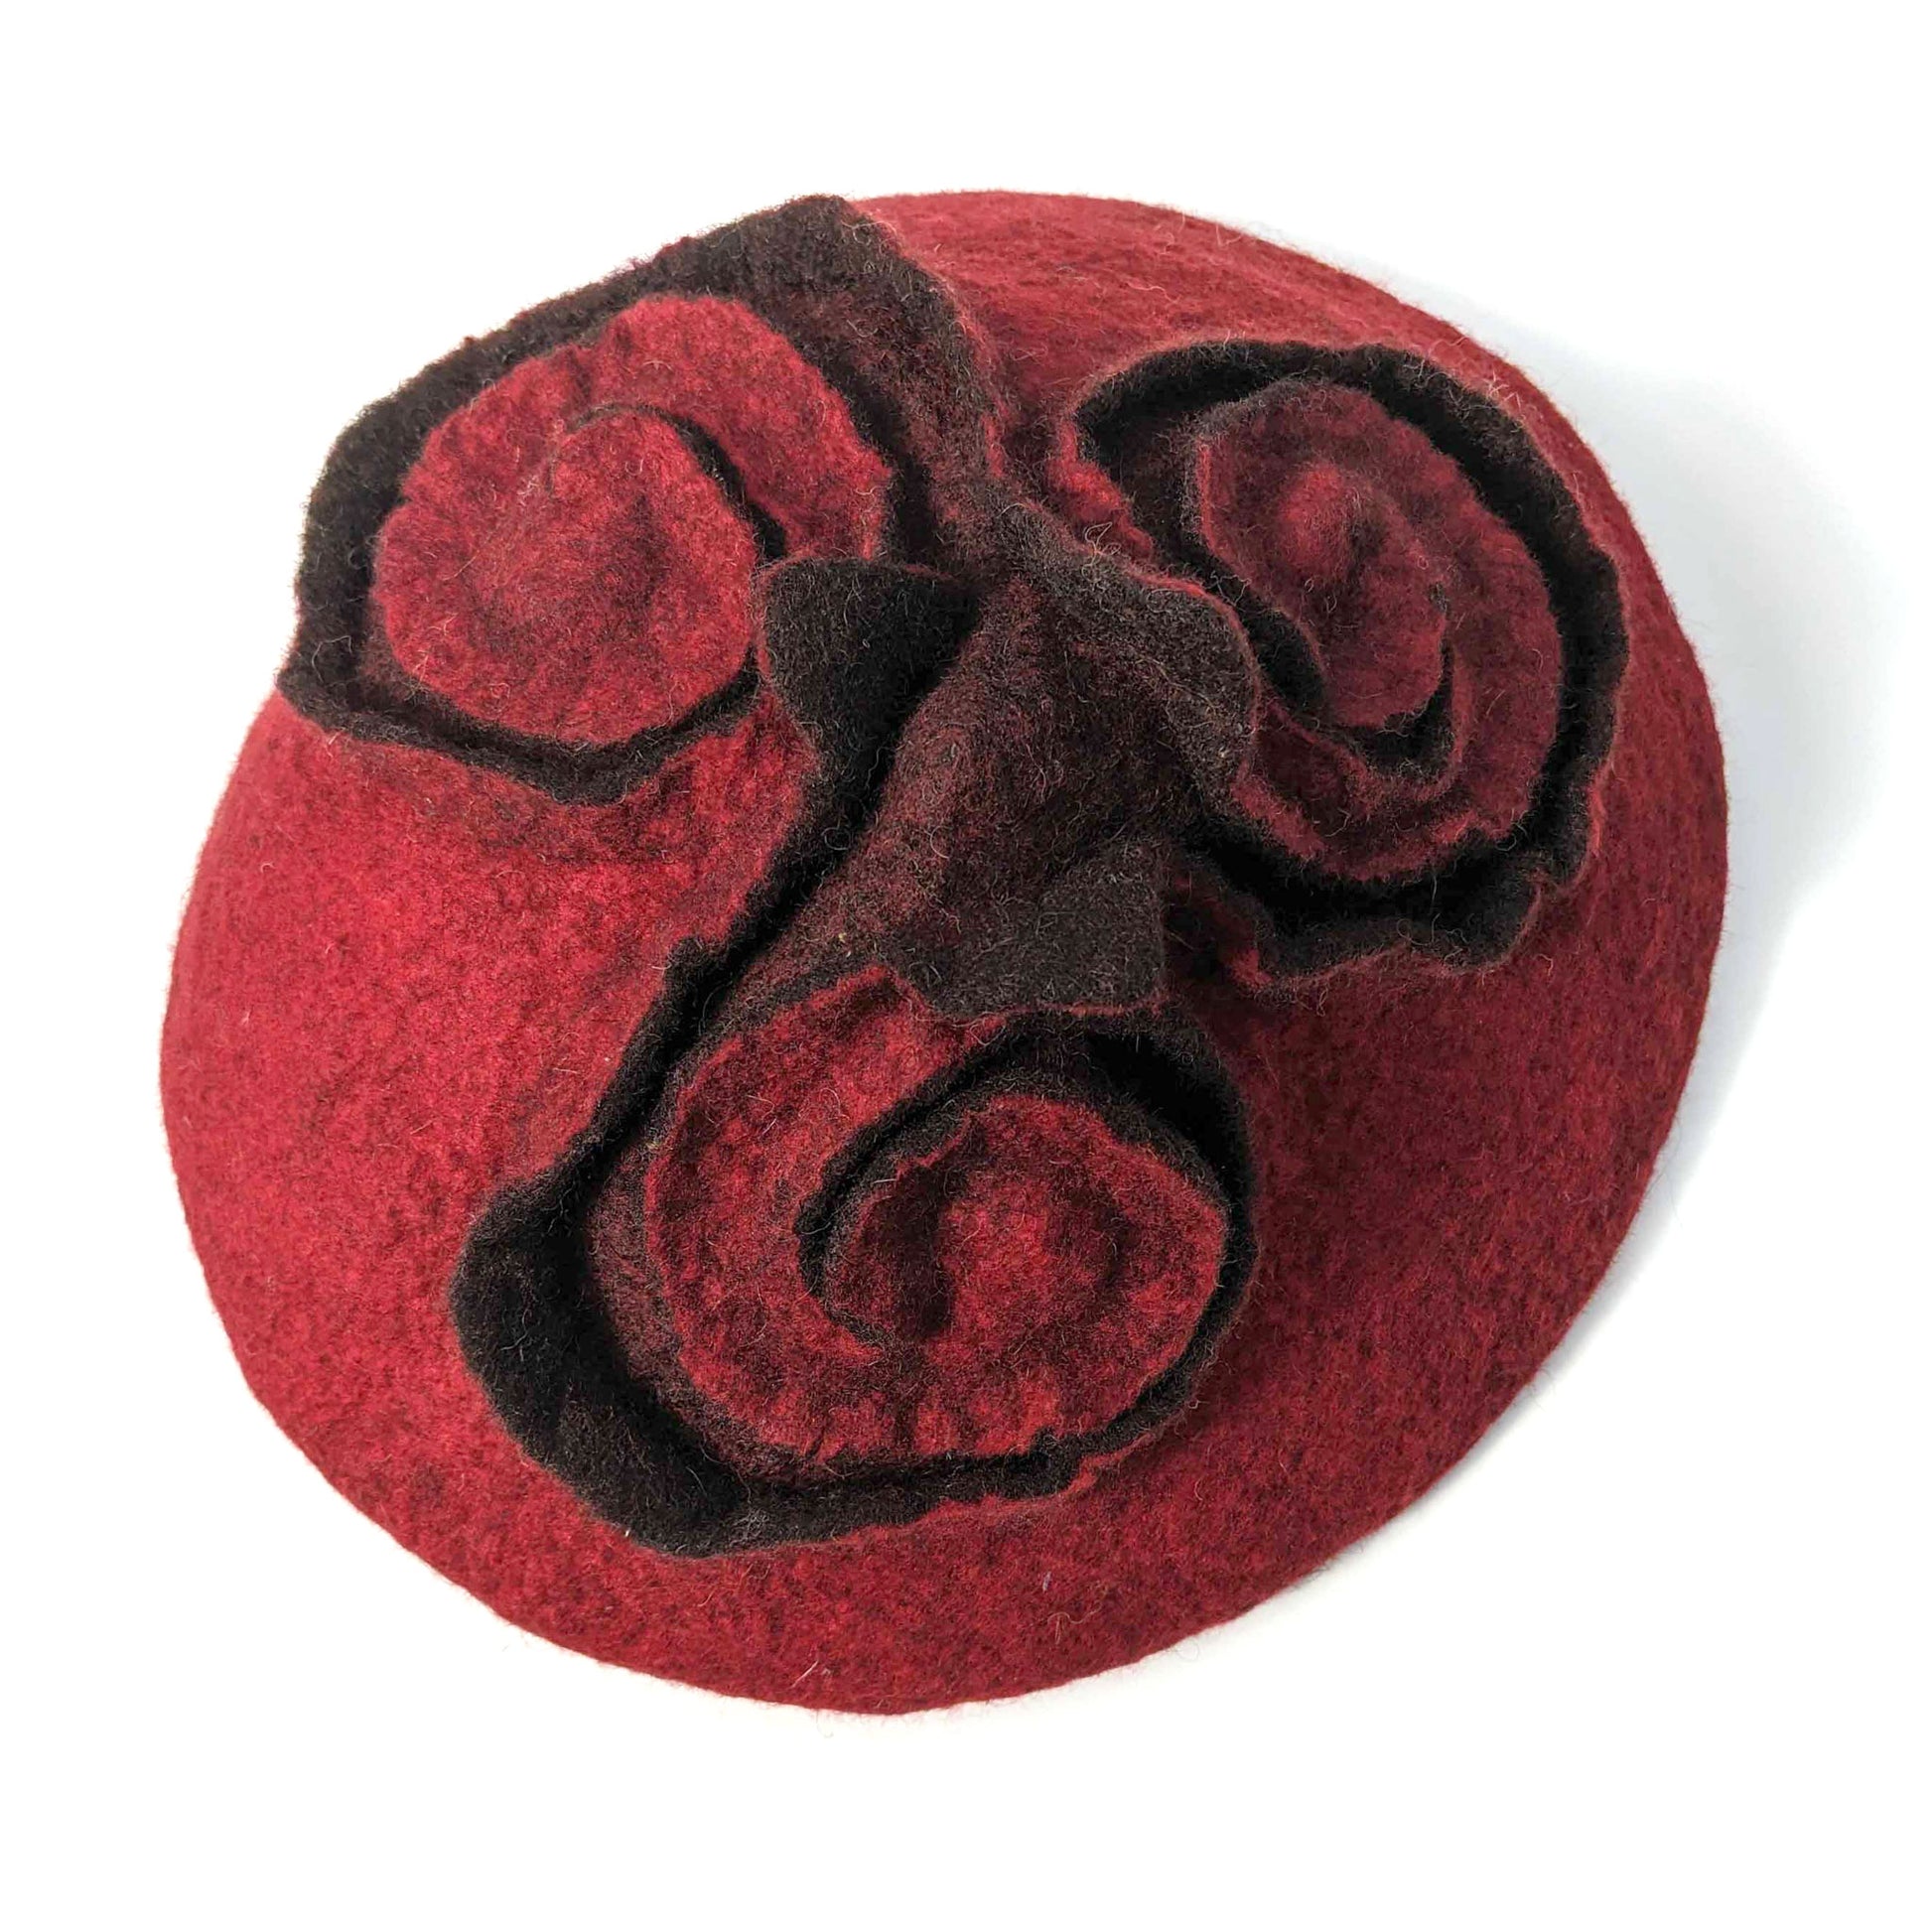 Felted Red Beret with Triskele Motif - top view